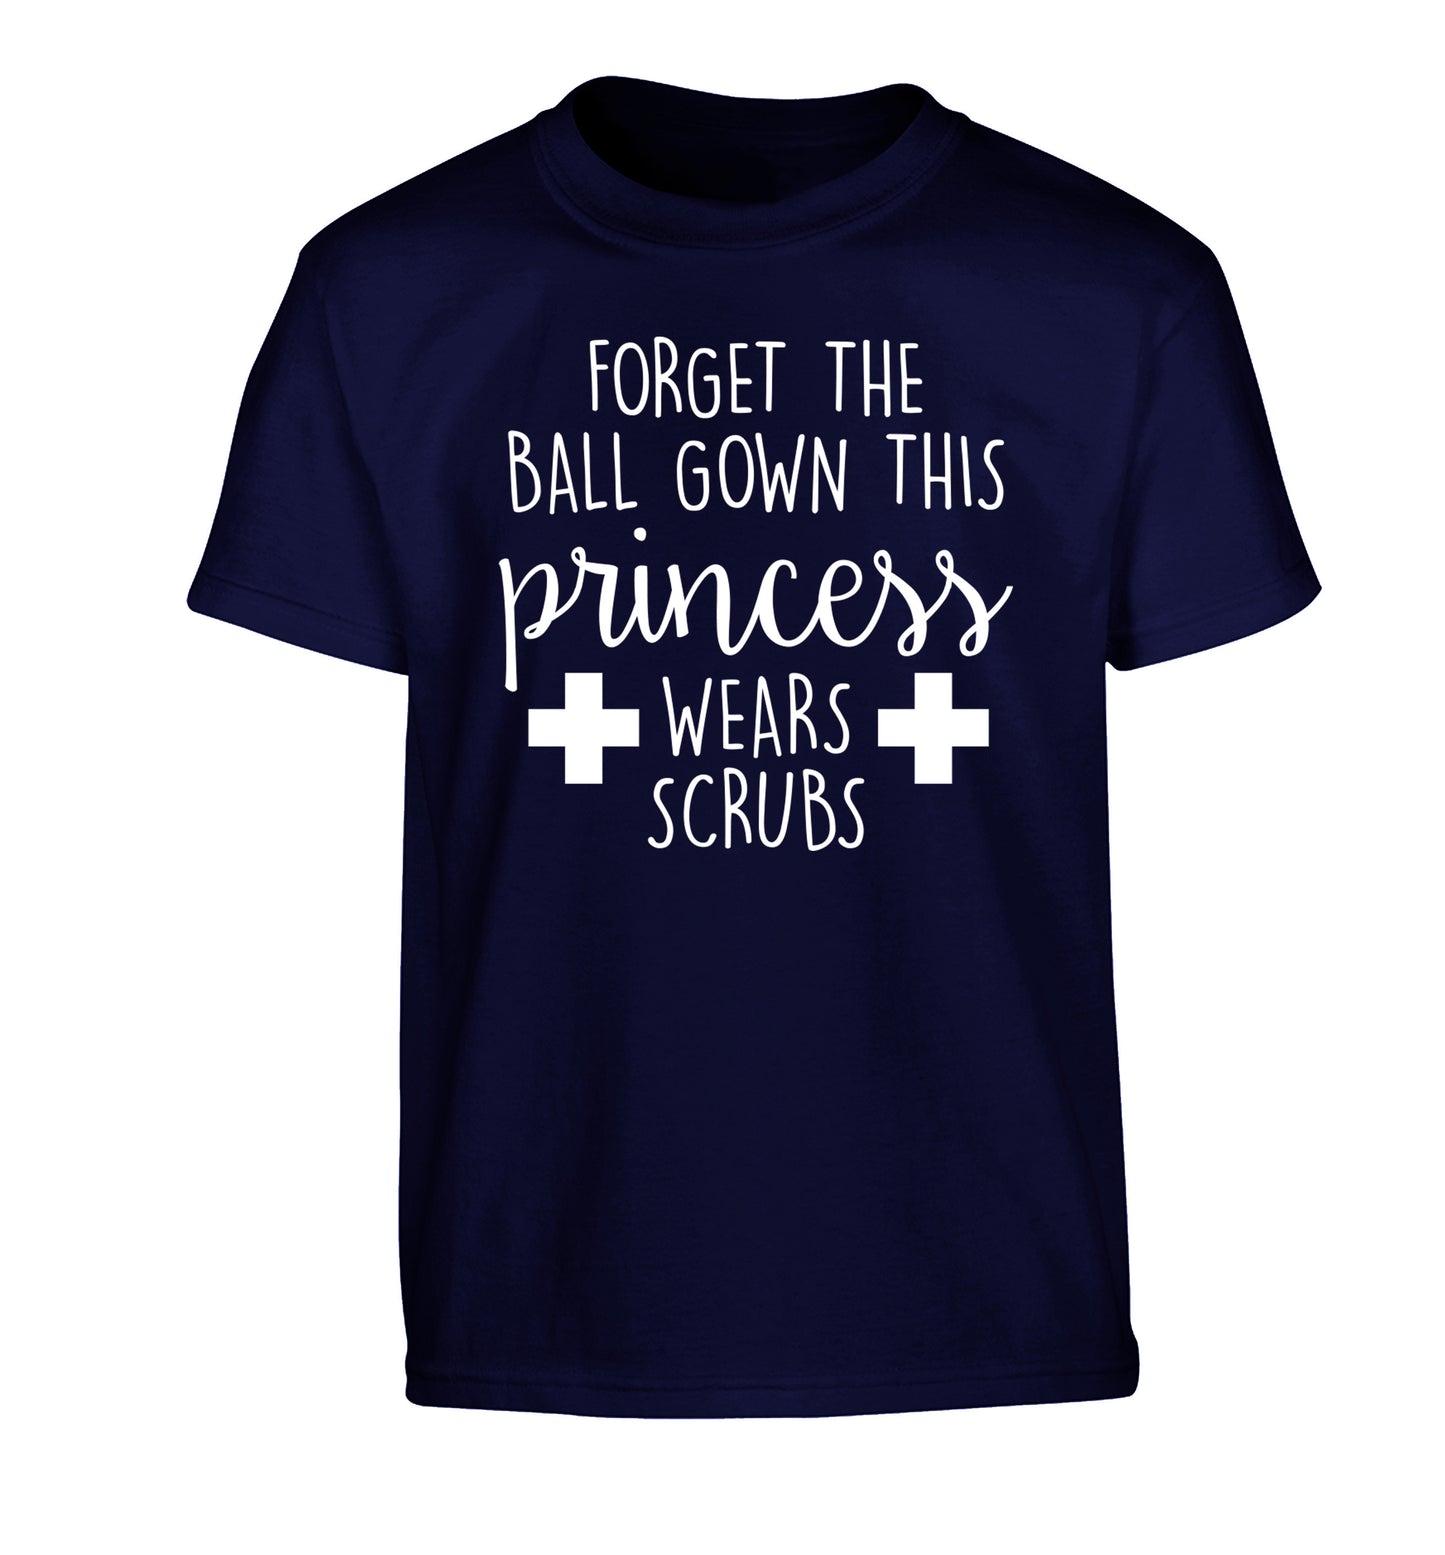 Forget the ball gown this princess wears scrubs Children's navy Tshirt 12-14 Years